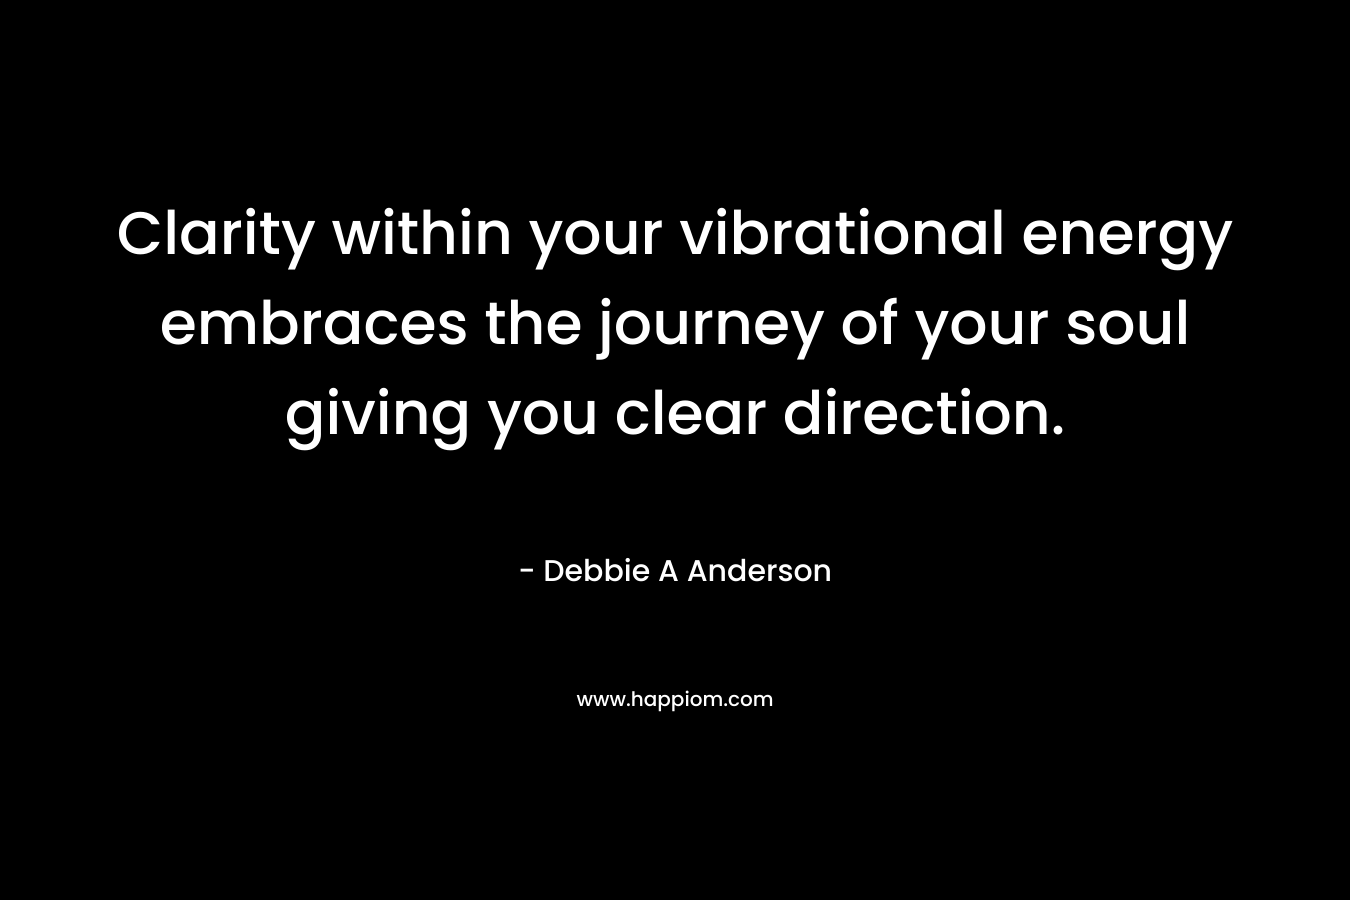 Clarity within your vibrational energy embraces the journey of your soul giving you clear direction. – Debbie A Anderson